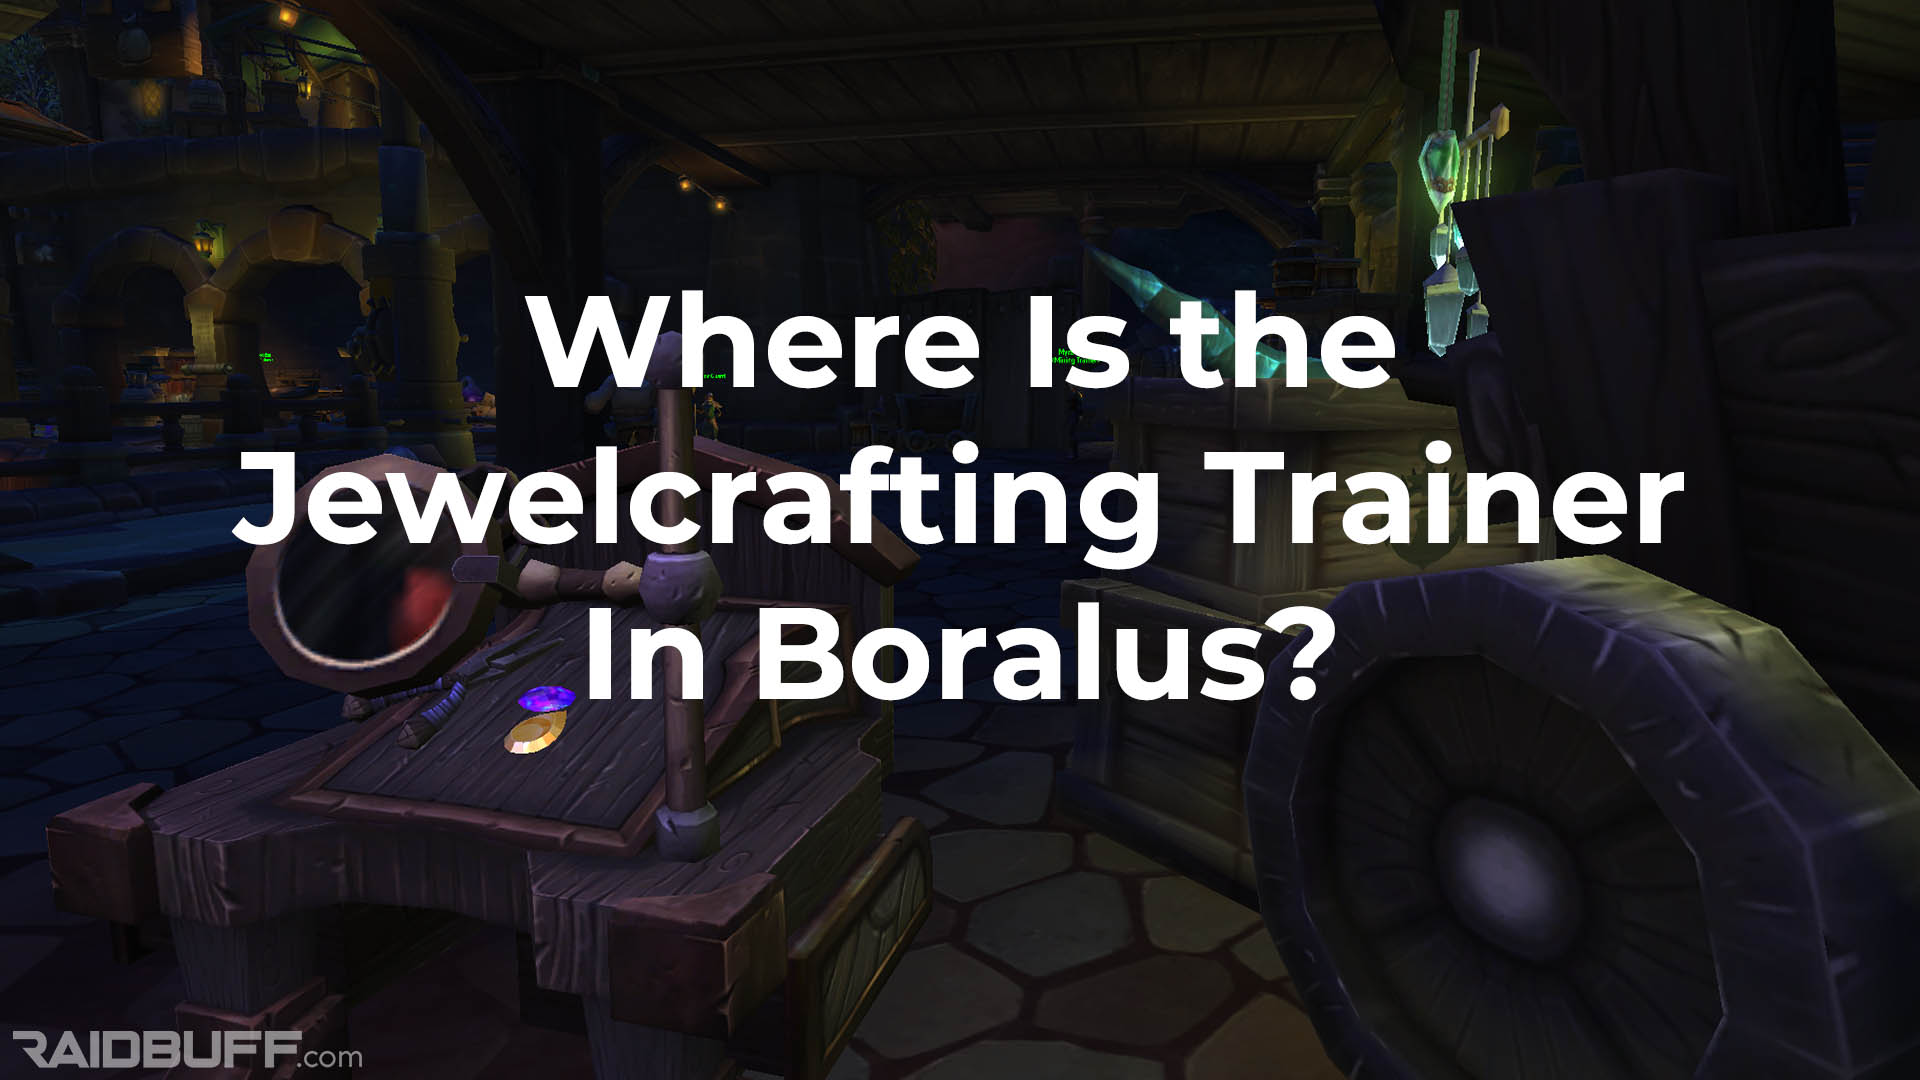 An image taken in the jewelcrafting trainer's table in Boralus with the words "Where Is the Jewelcrafting Trainer In Boralus?" overlayed